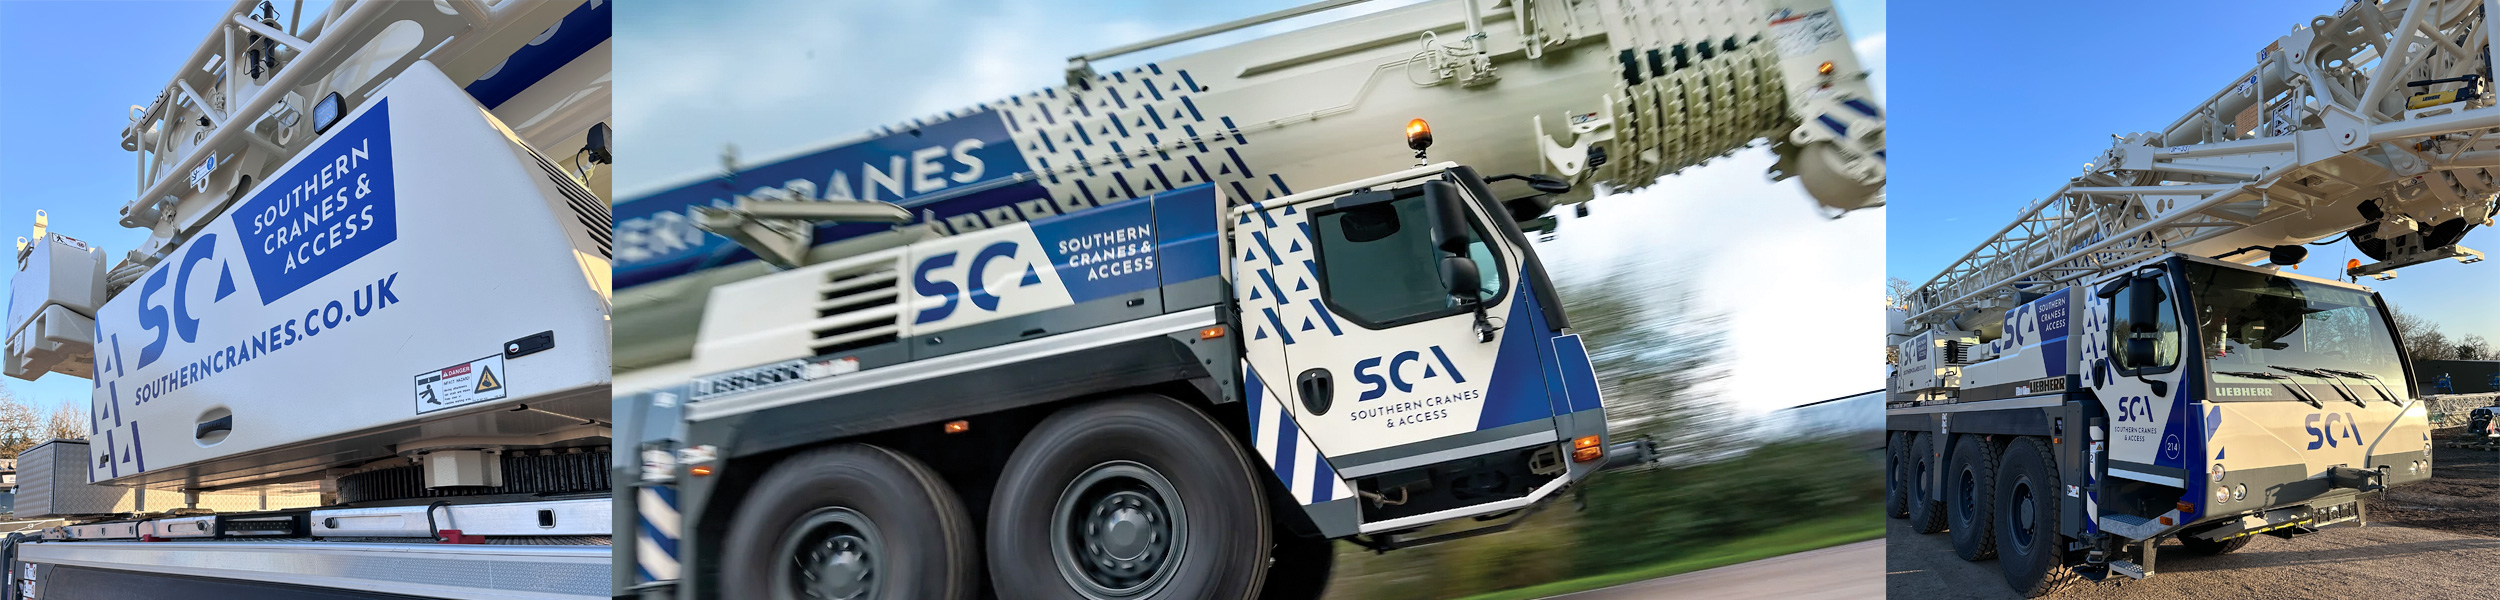 Contact Southern Cranes & Access, Sussex, Surrey, London, South East UK